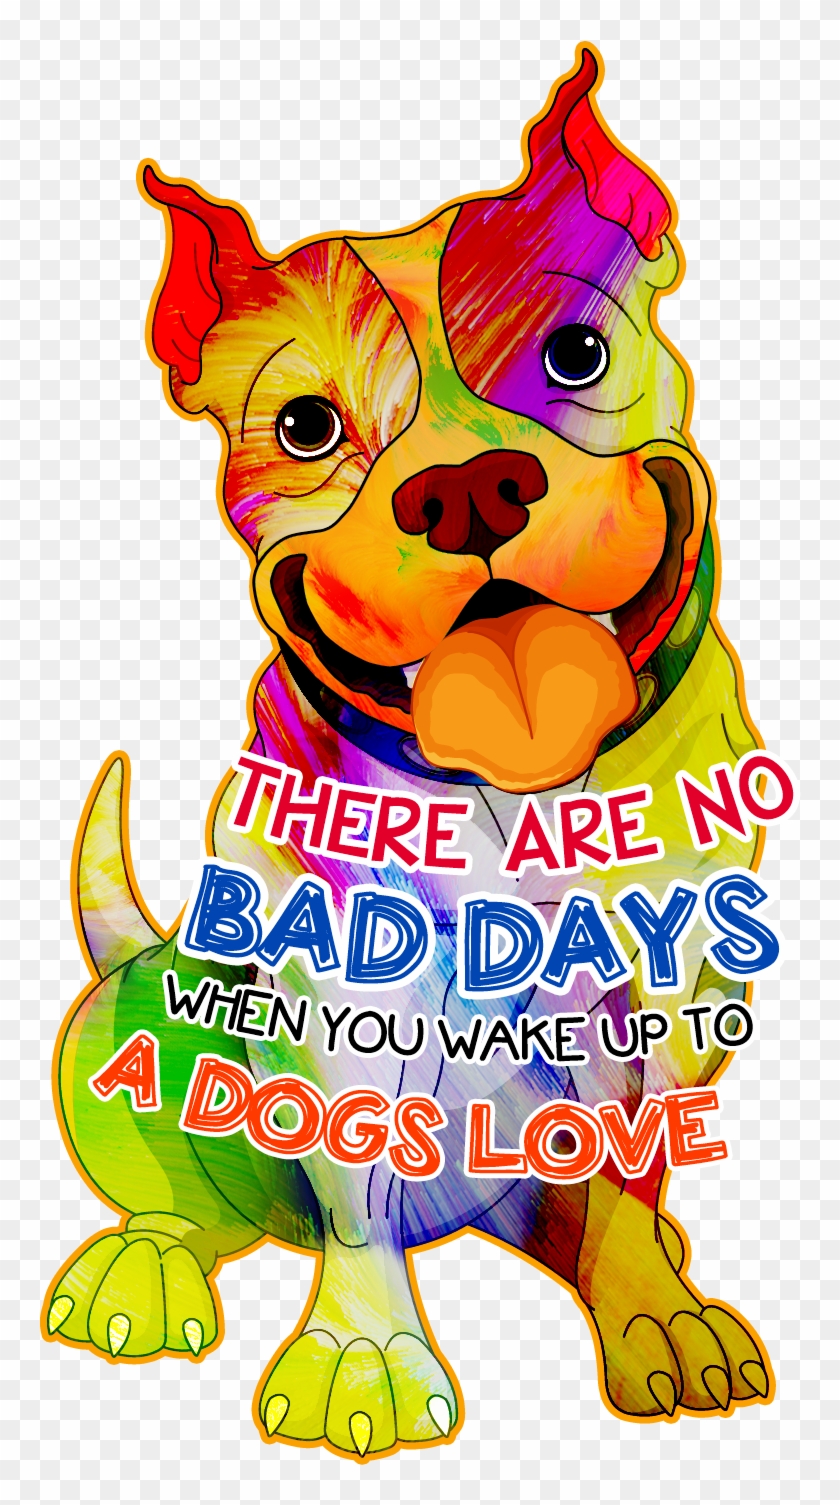 There Are No Bad Days When You Wake Up To A Dog's Love - Dog Lover Gift - There Are No Bad Days When You Wake #467587